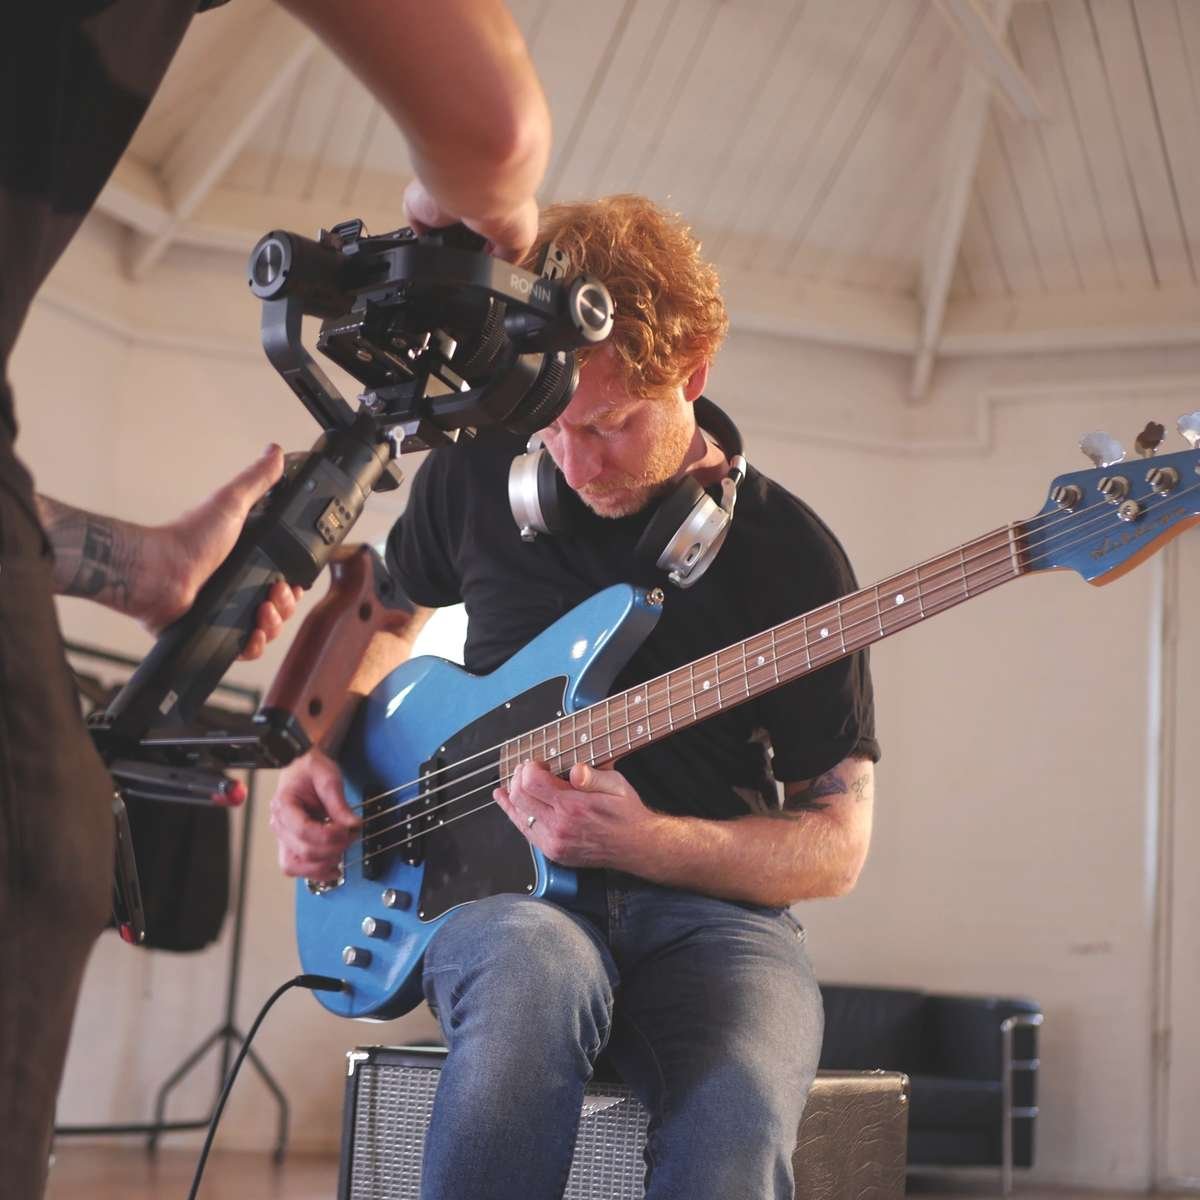 James Johnston playing the bass for a video